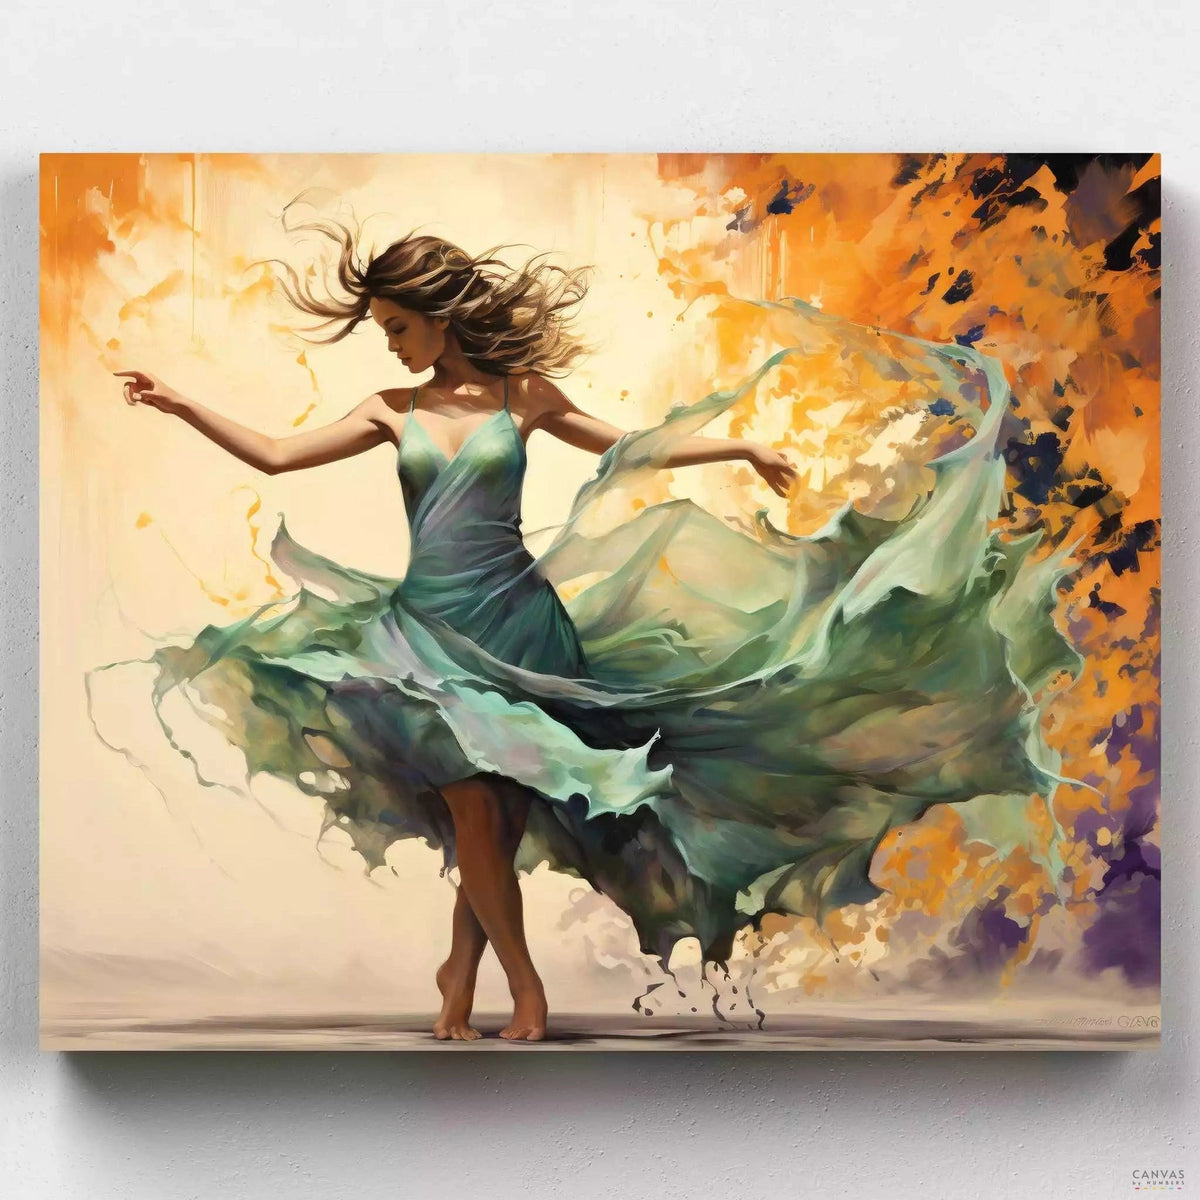 Dancer's Poise - Paint by Numbers-Paint by Numbers-16"x20" (40x50cm) No Frame-Canvas by Numbers US